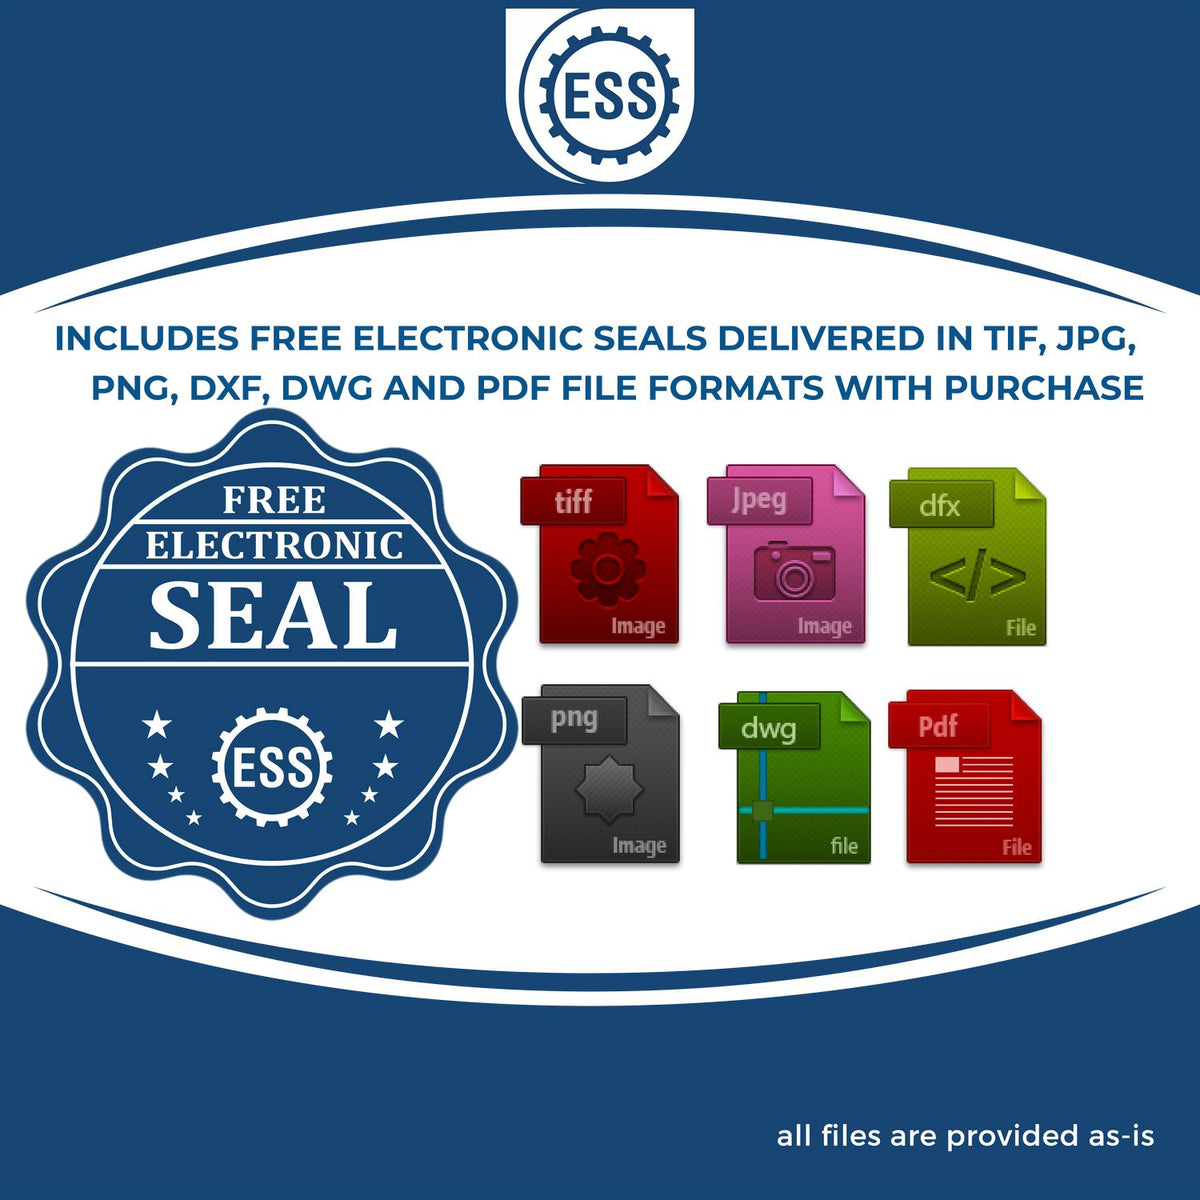 An infographic for the free electronic seal for the Slim Pre-Inked Indiana Land Surveyor Seal Stamp illustrating the different file type icons such as DXF, DWG, TIF, JPG and PNG.